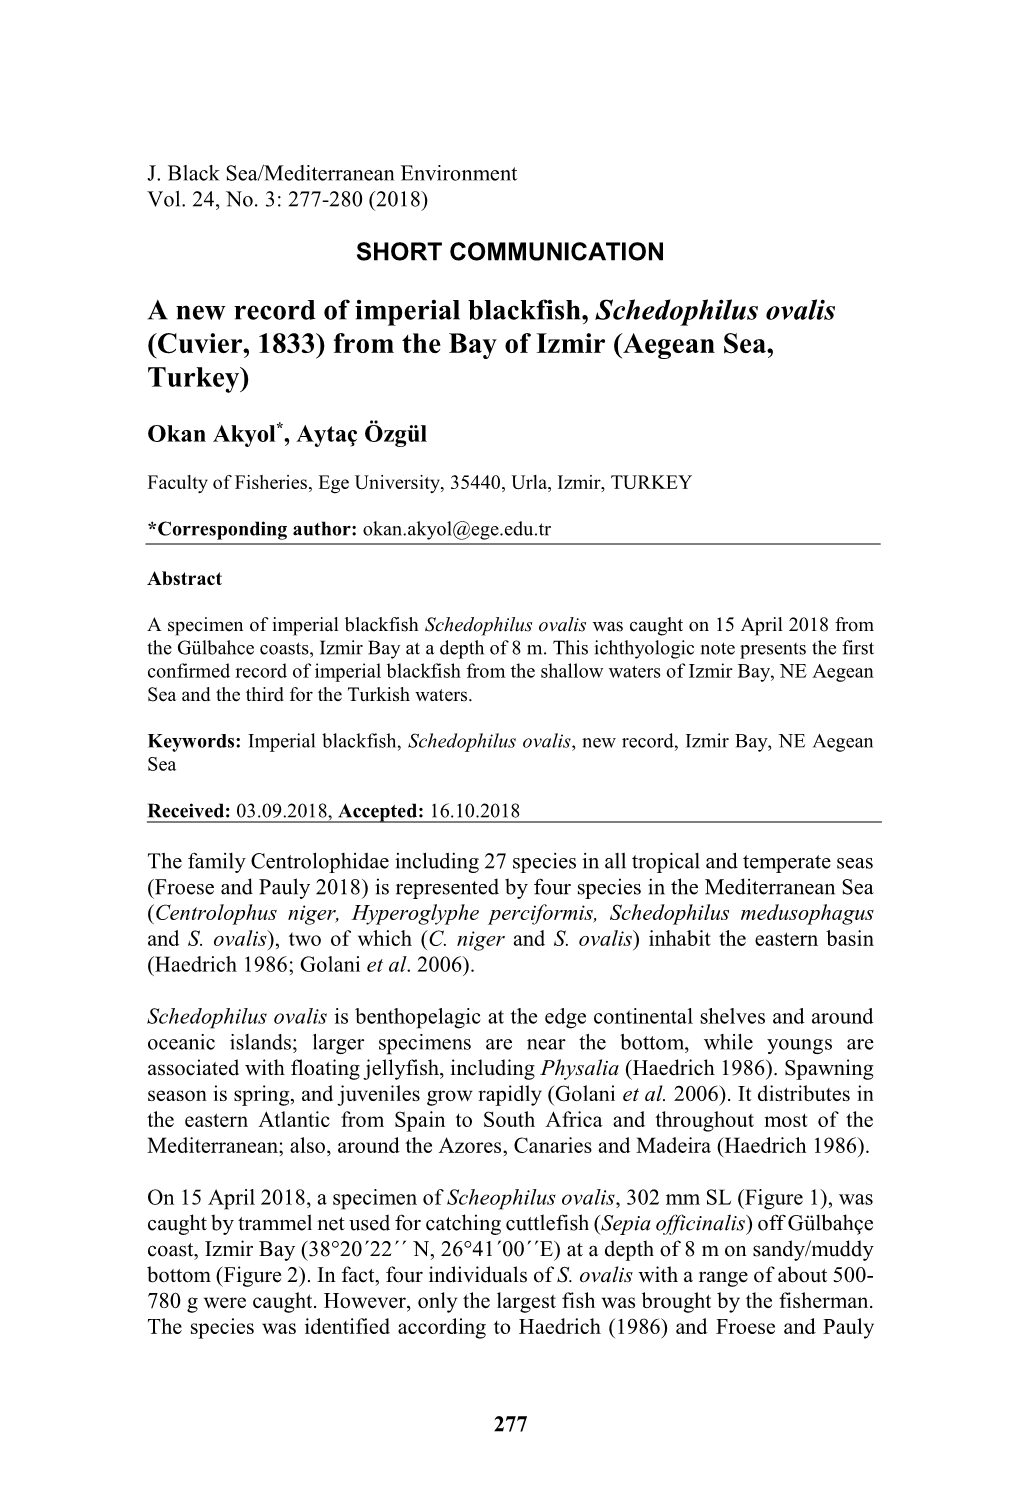 A New Record of Imperial Blackfish, Schedophilus Ovalis (Cuvier, 1833) from the Bay of Izmir (Aegean Sea, Turkey)